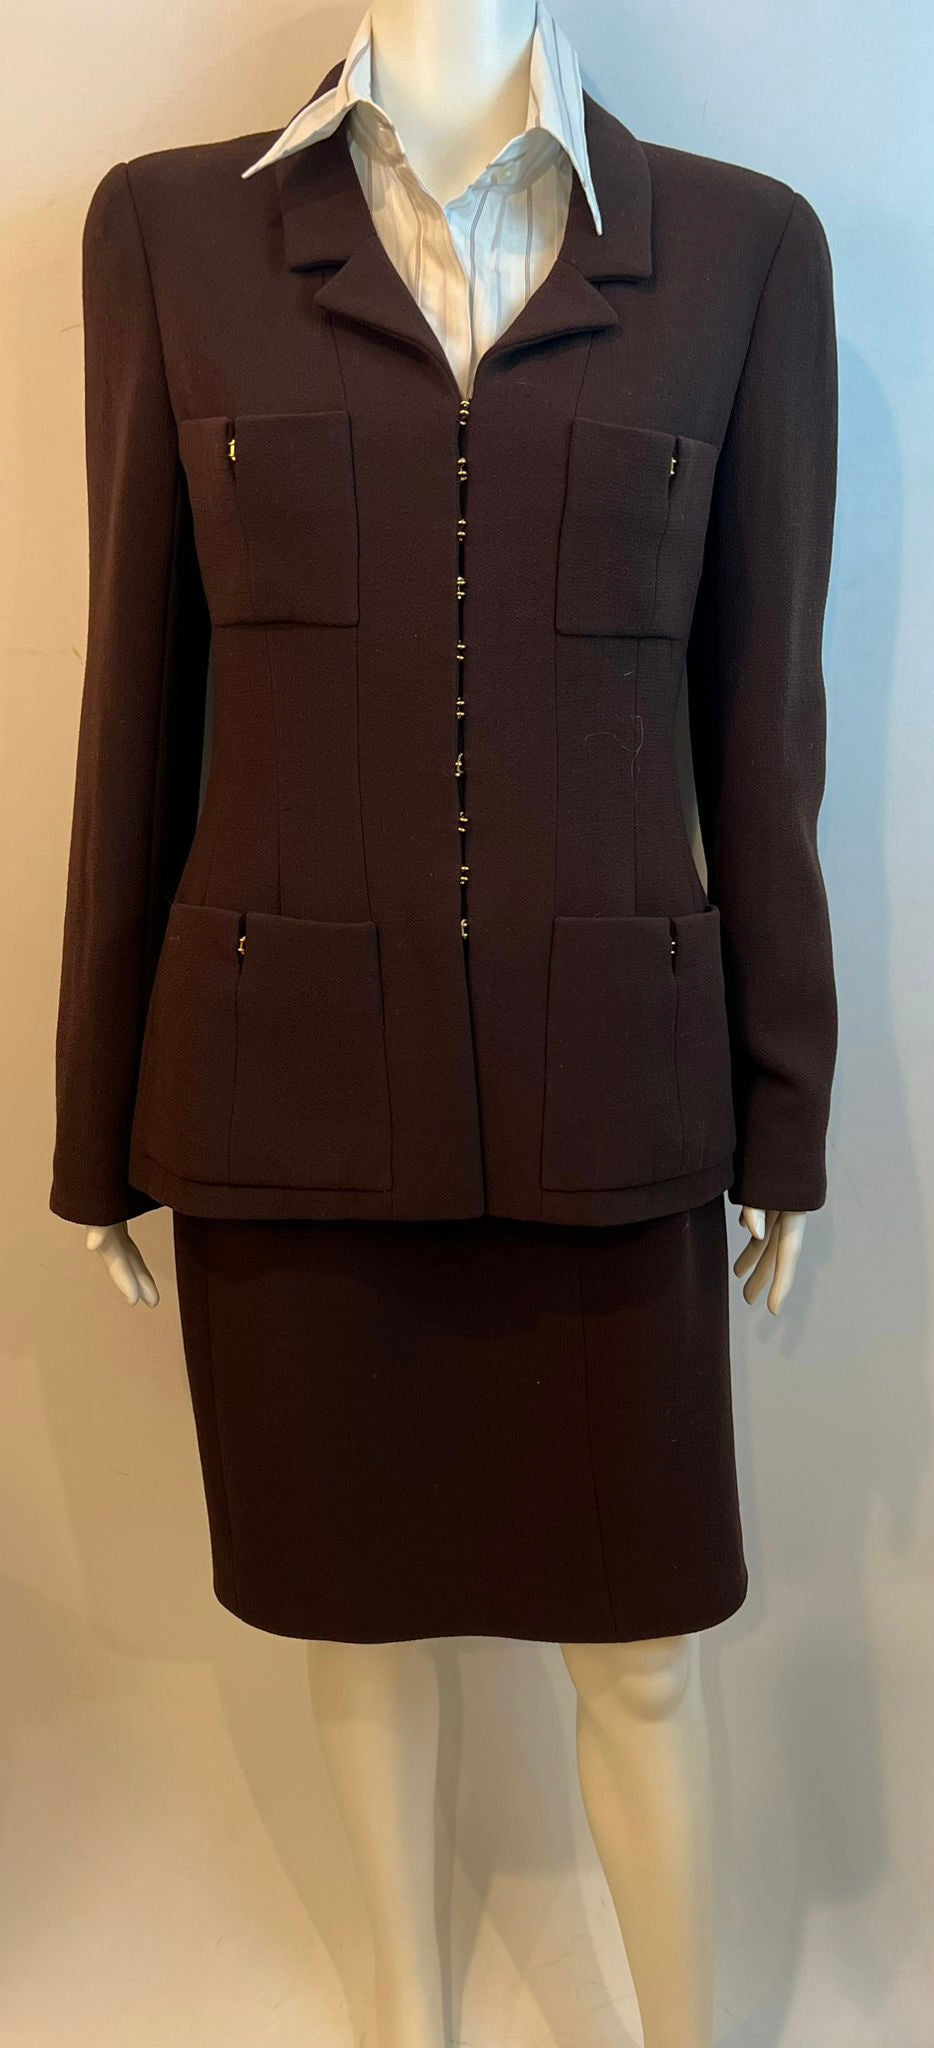 HelensChanel Chanel Vintage 96A 1996 Fall Brown Skirt Suit FR 40 US 6